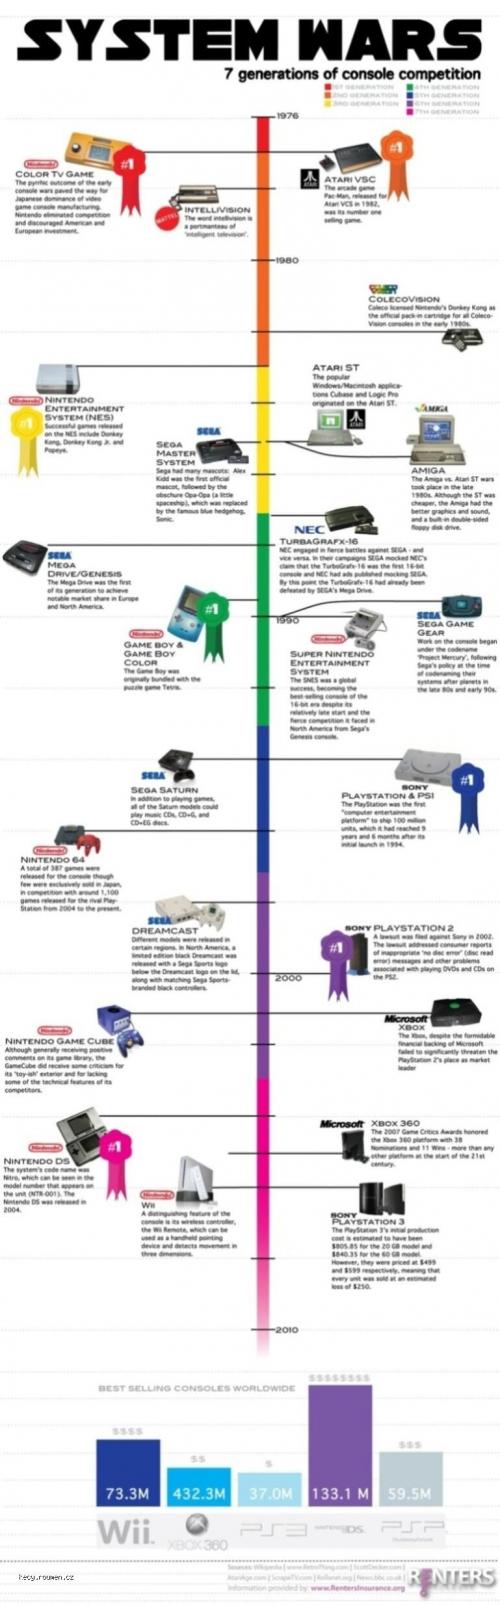 7 Generations of System Wars